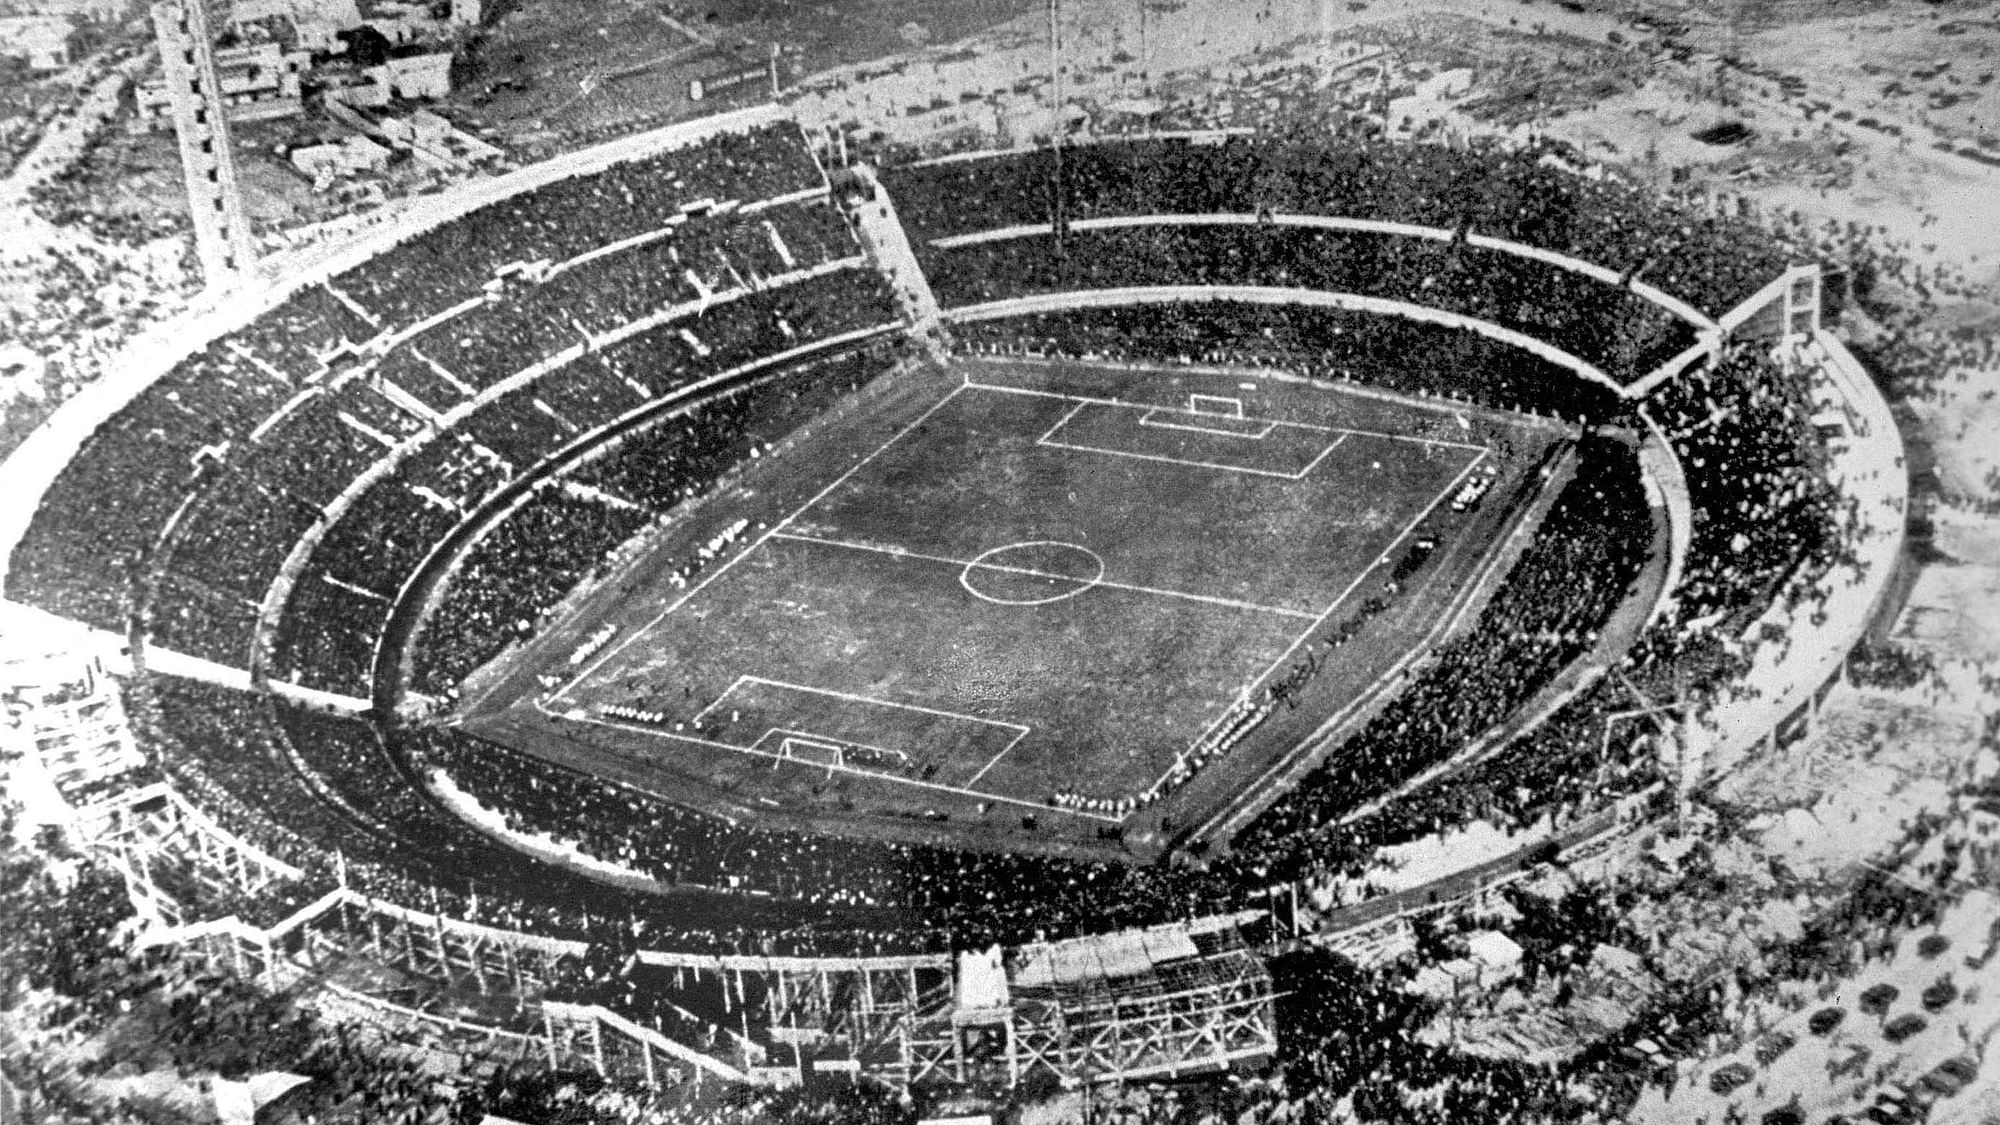 n this July 30, 1930 file photo, an aerial view of the Centenario stadium in Montevideo, Uruguay. Uruguay defeated Argentina 4-2 in the final of the first soccer World Cup.&nbsp;